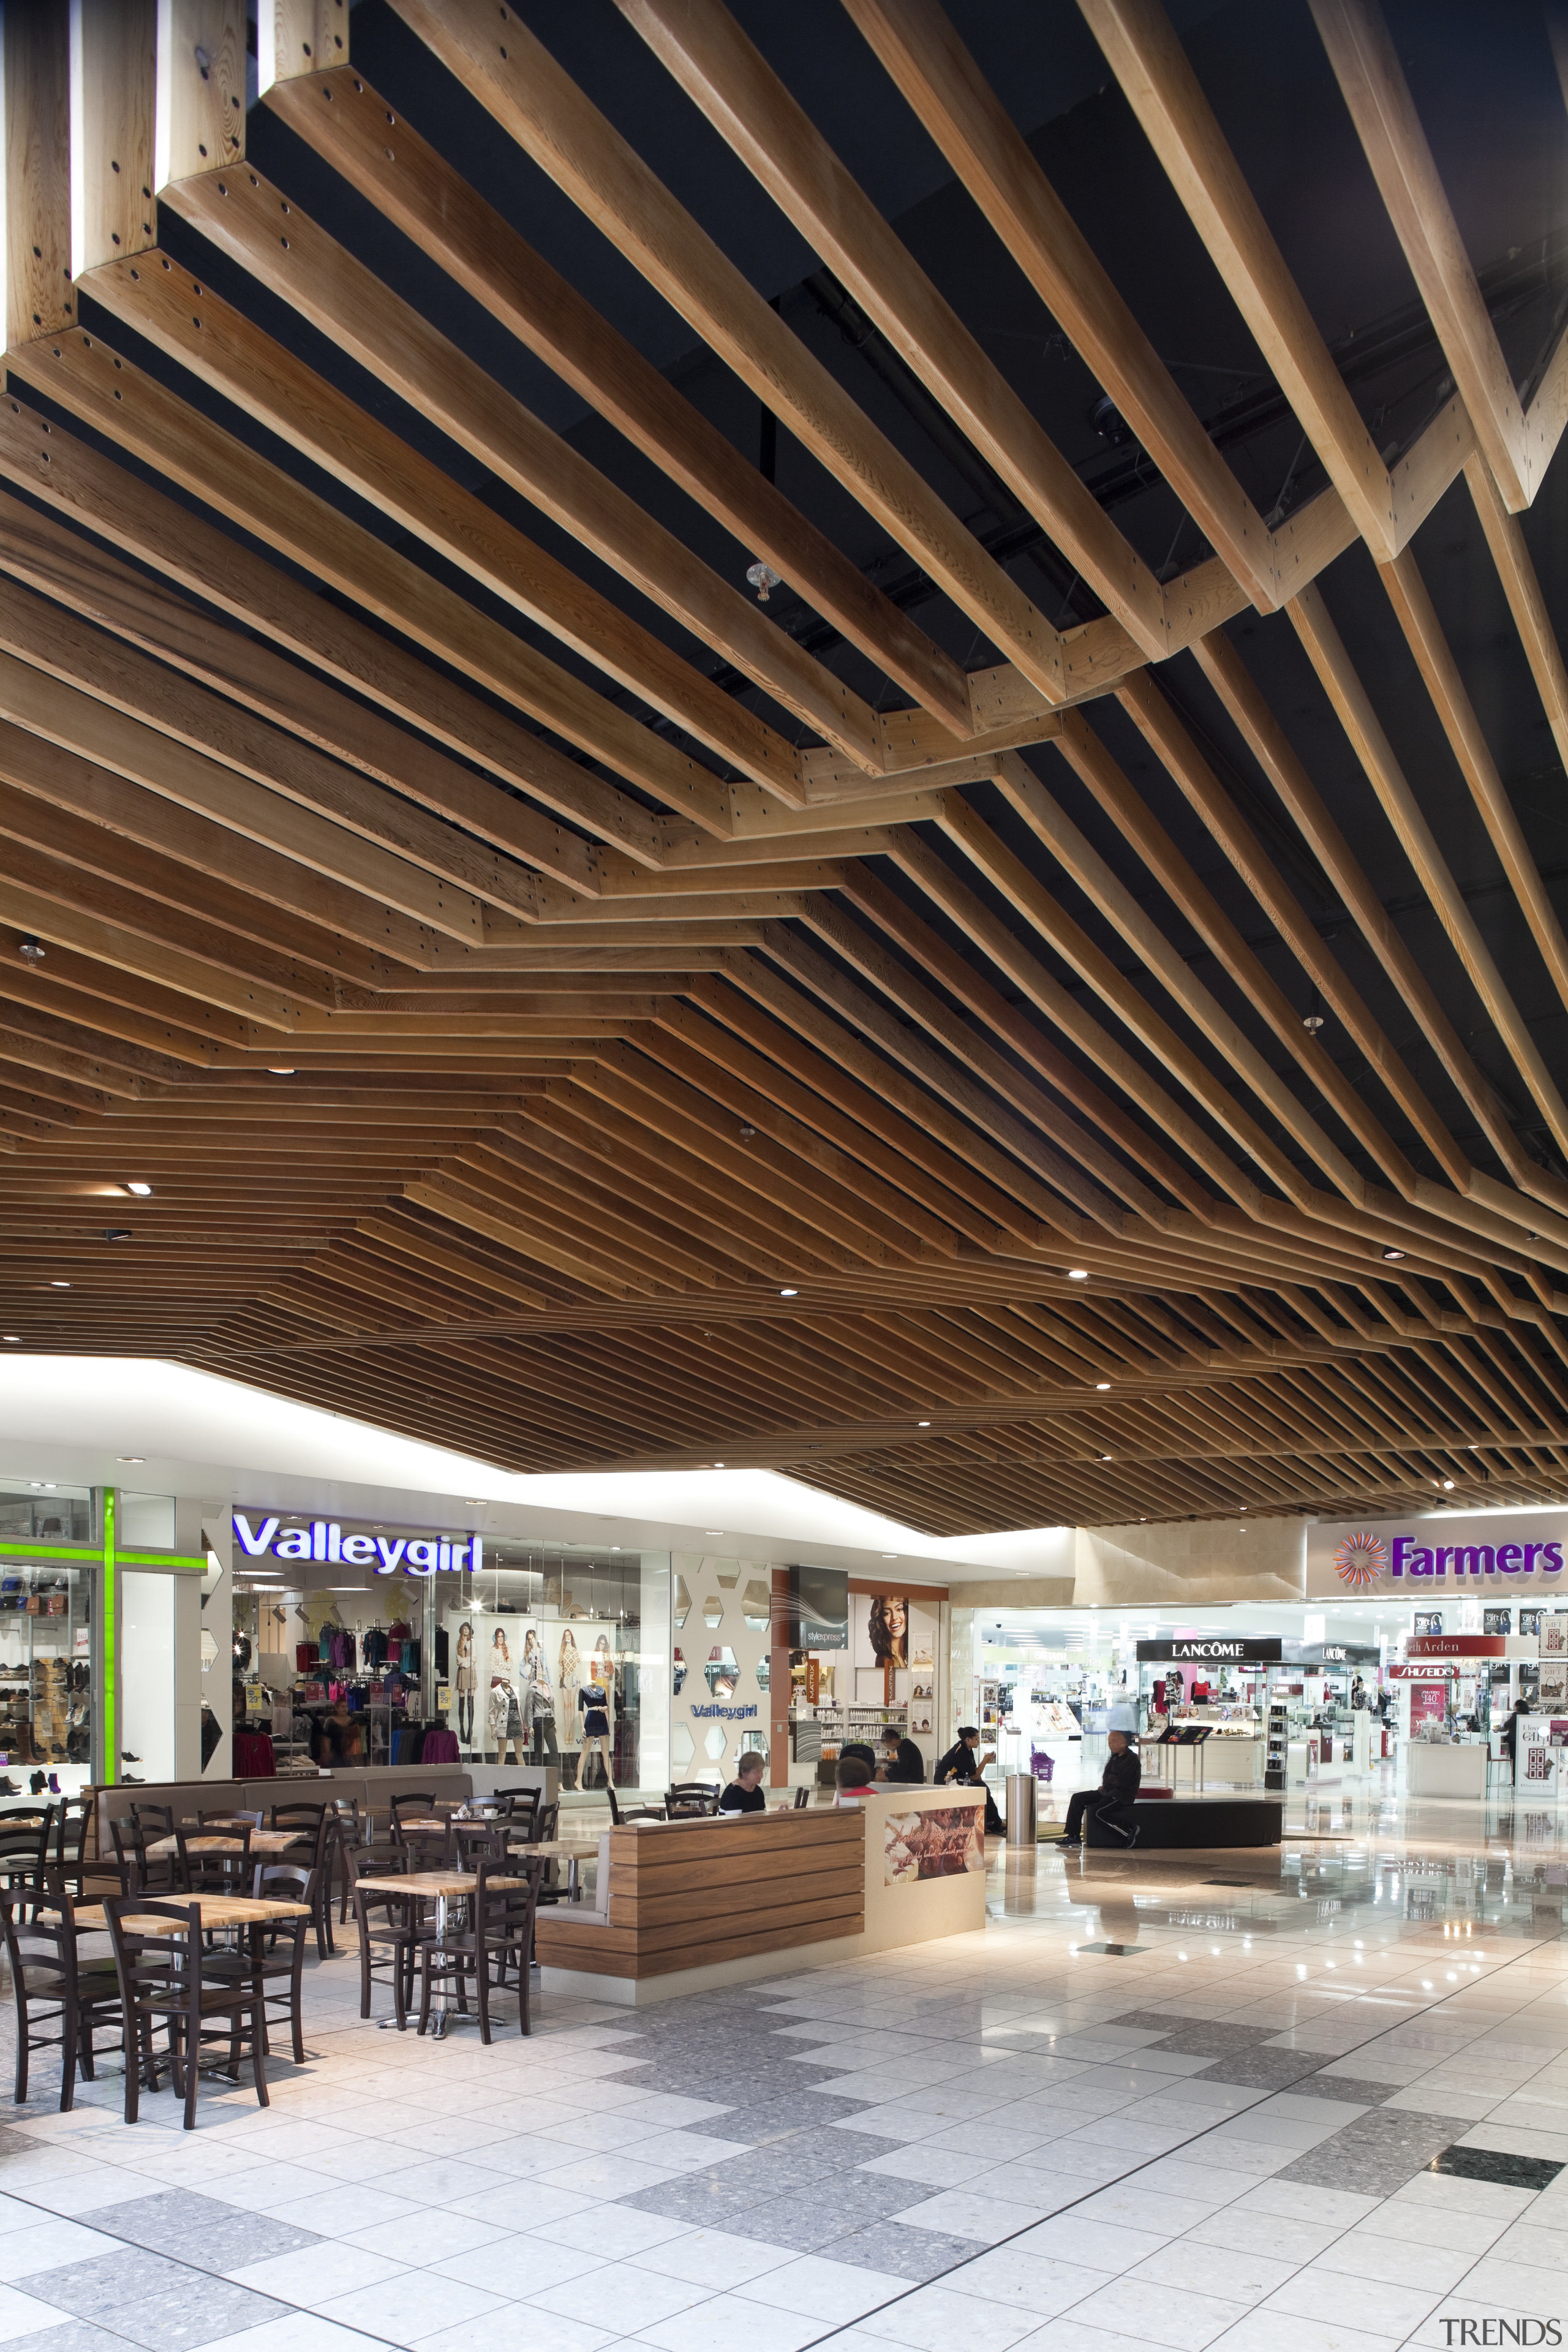 View of ceiling in mall. - View of architecture, ceiling, daylighting, lobby, roof, structure, wood, brown